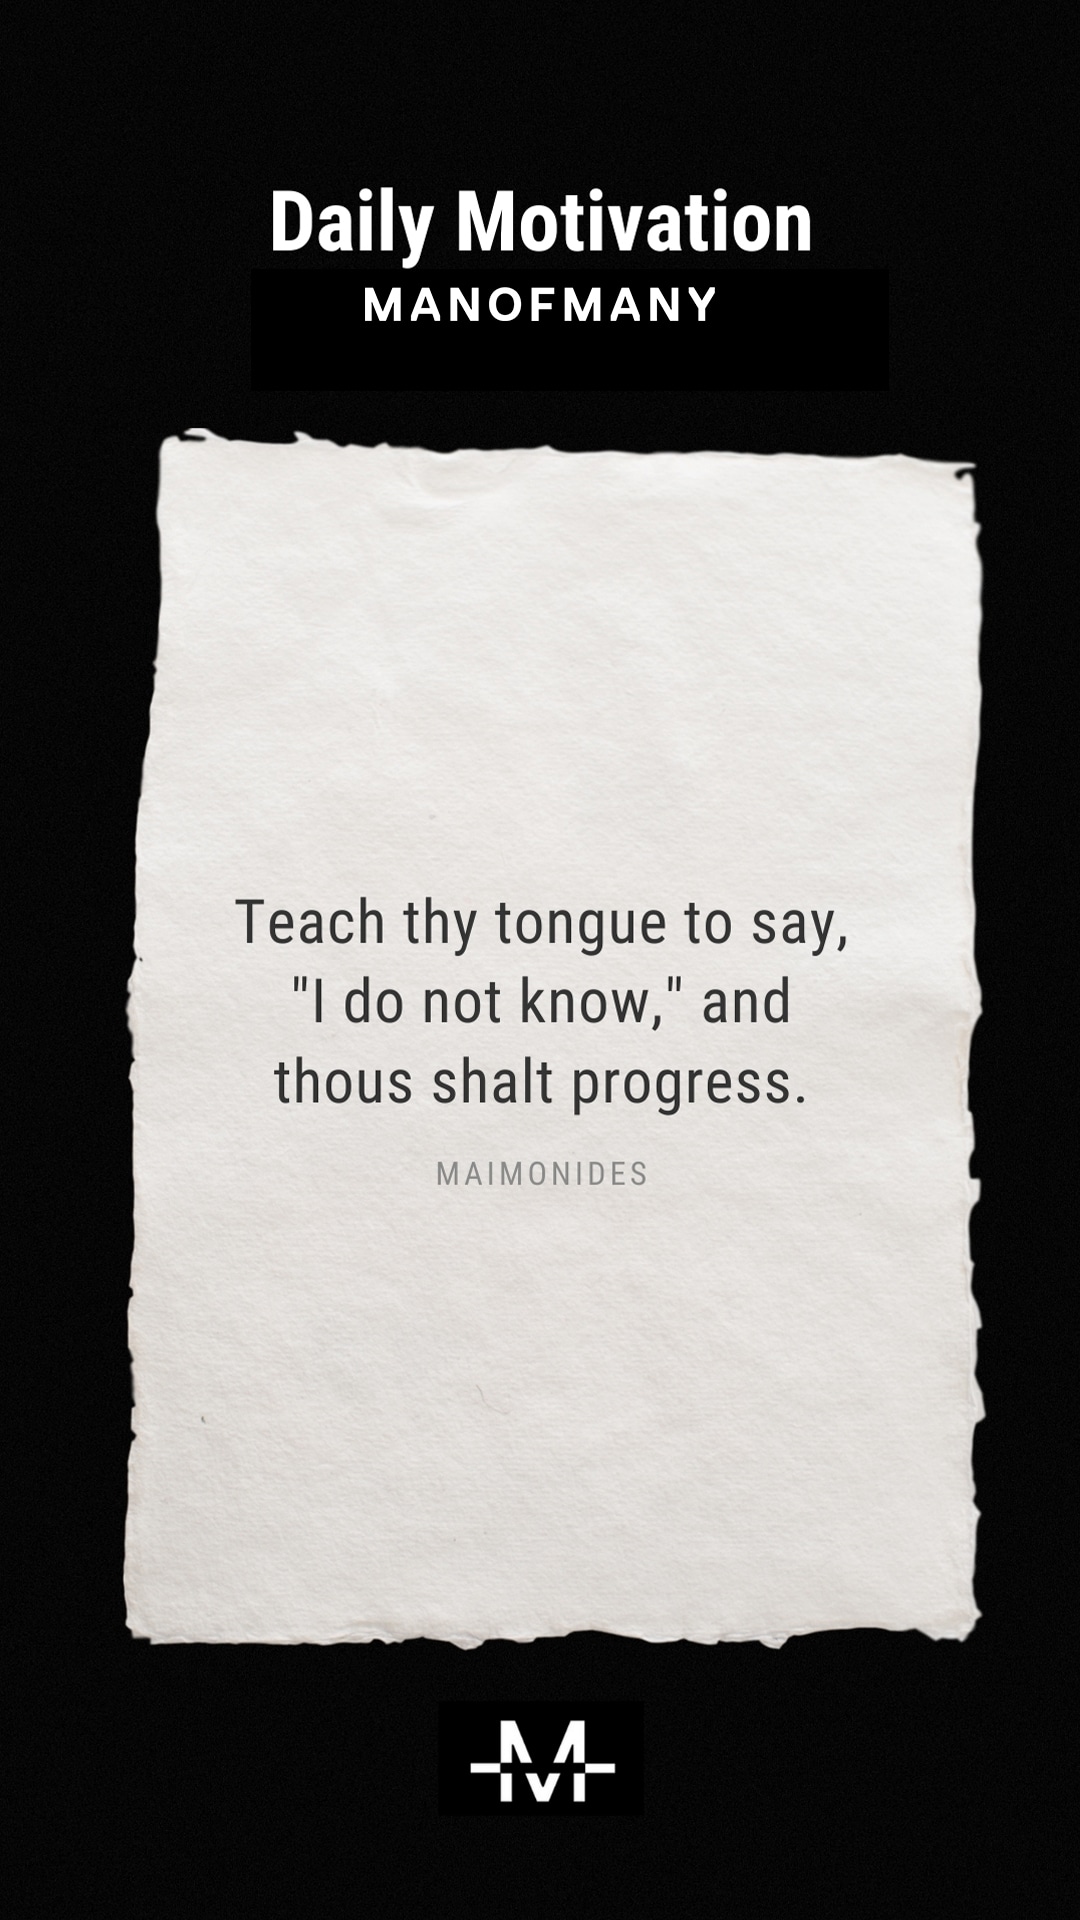 Teach thy tongue to say, "I do not know," and thous shalt progress. –Maimonides quote